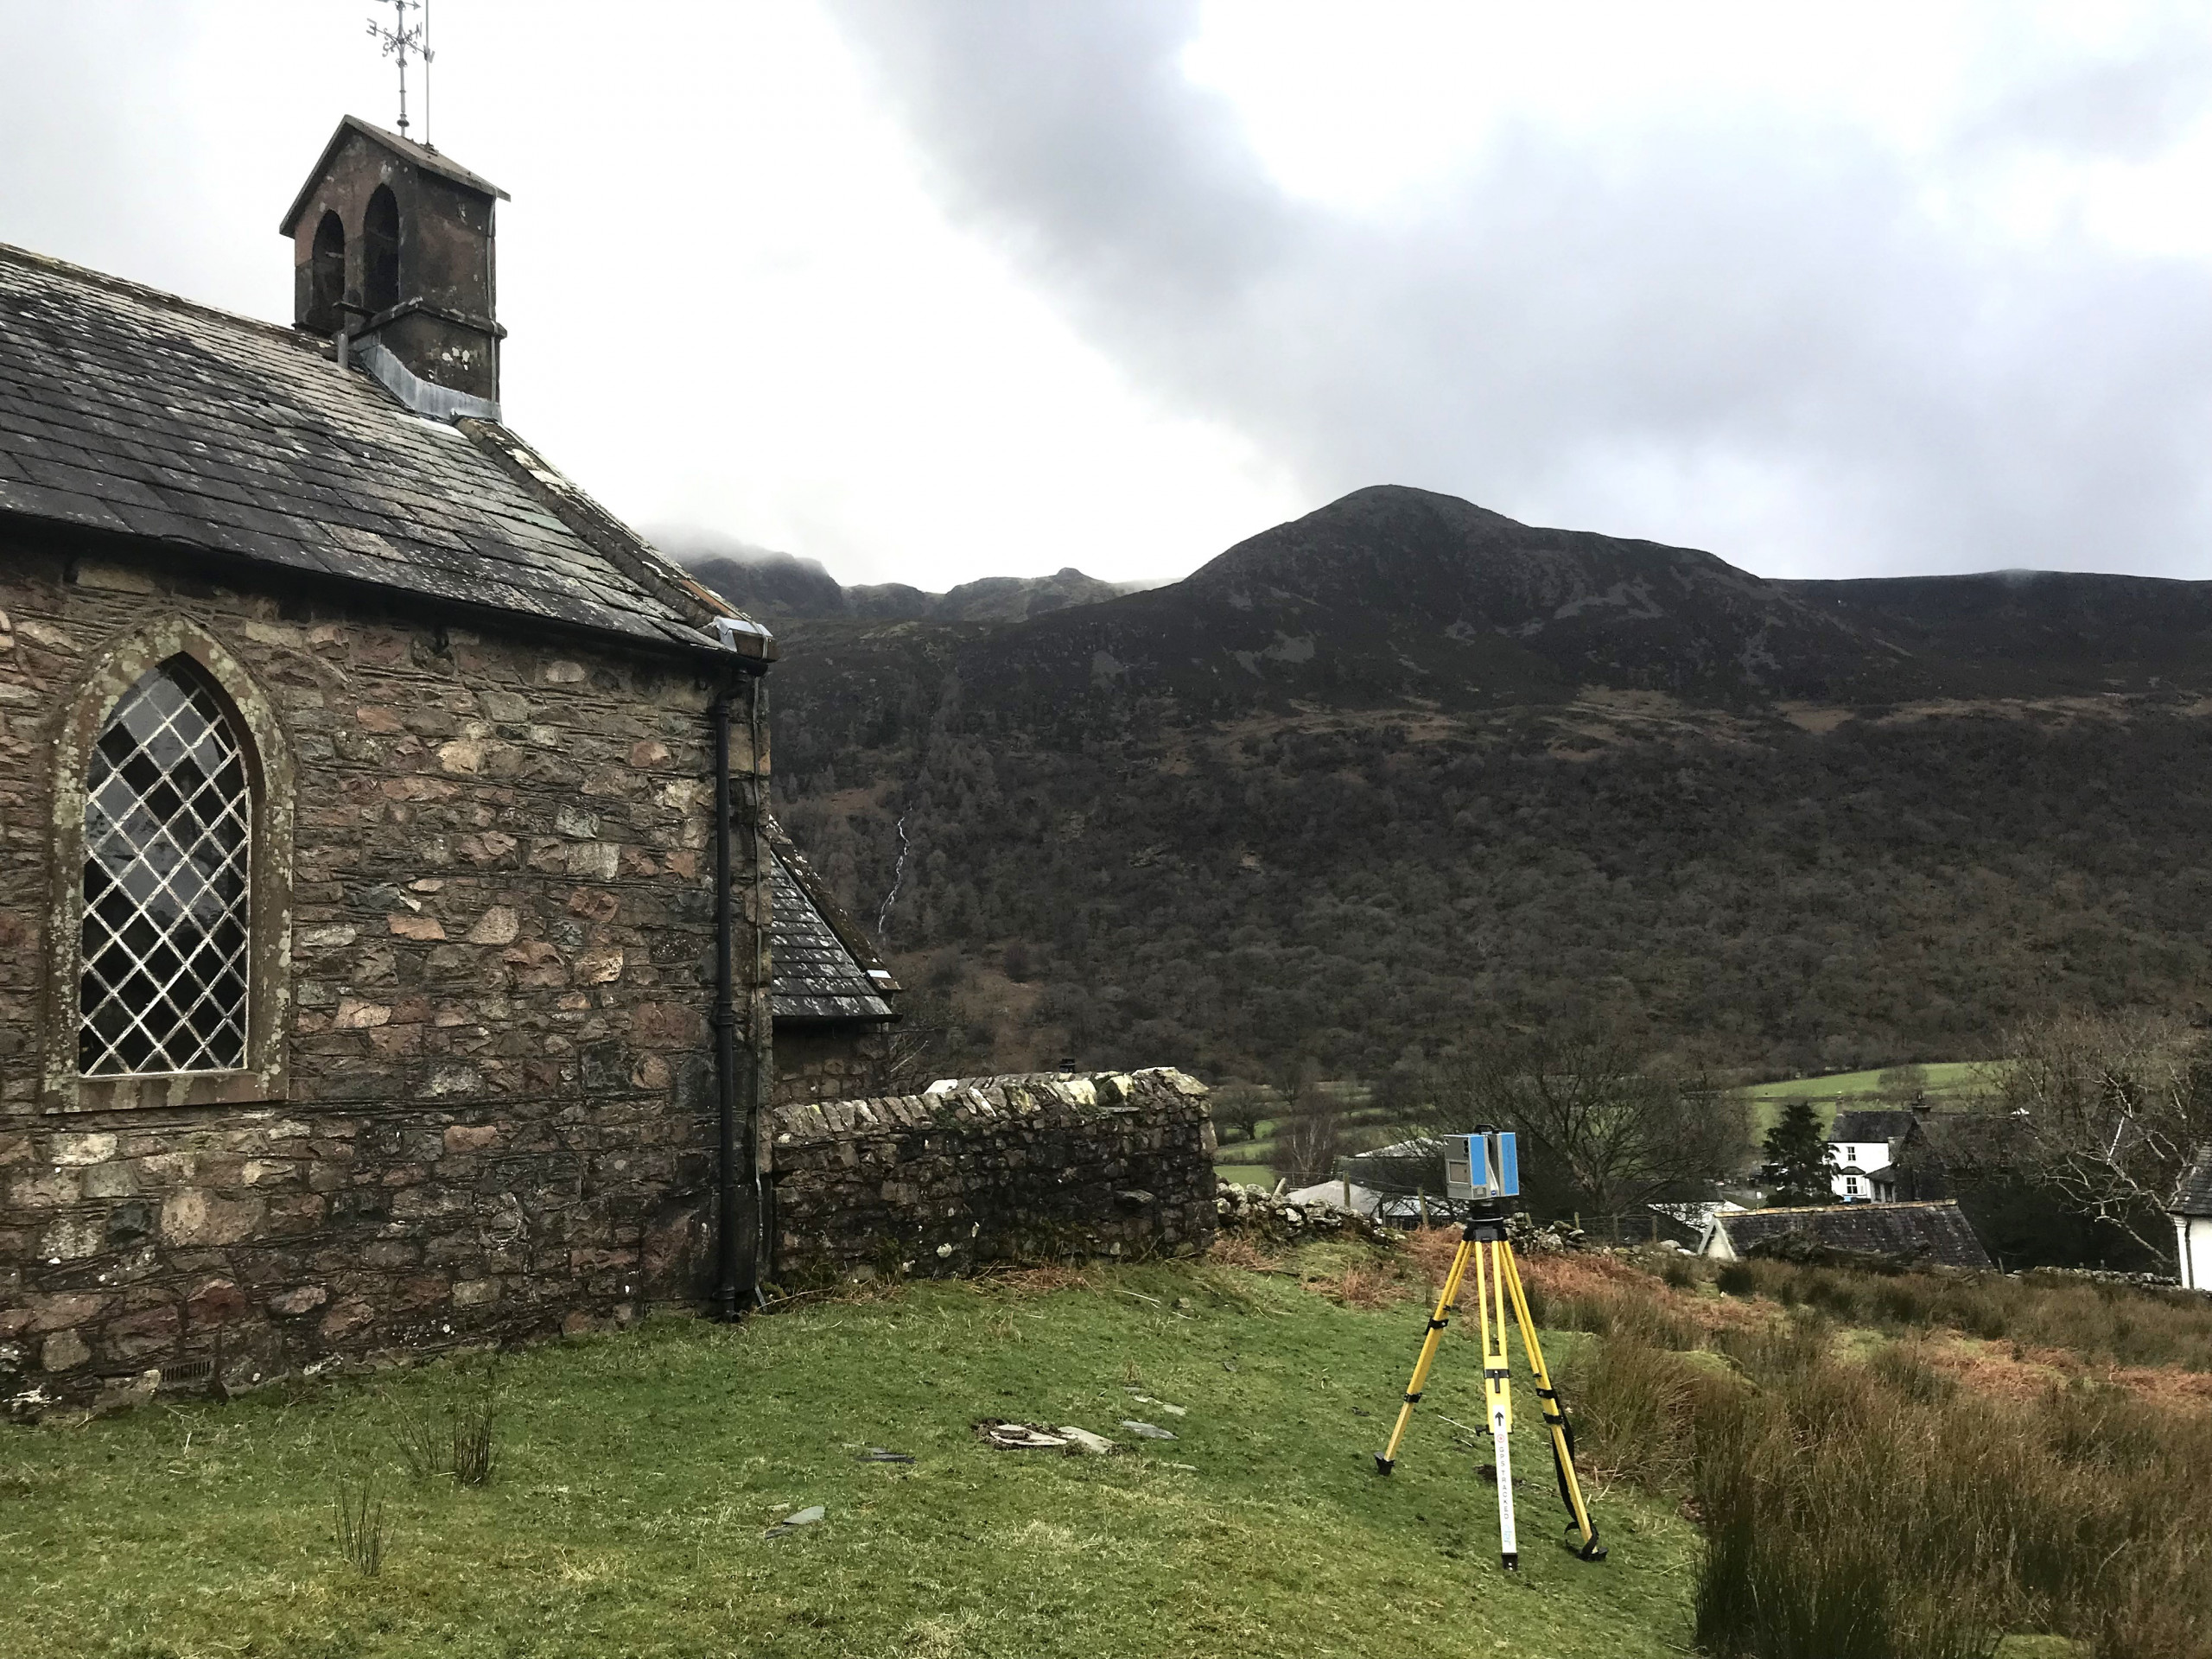 Blue 3D laser scanner on a yellow tripod measuring a stone church with mountains in the background under grey cloud.